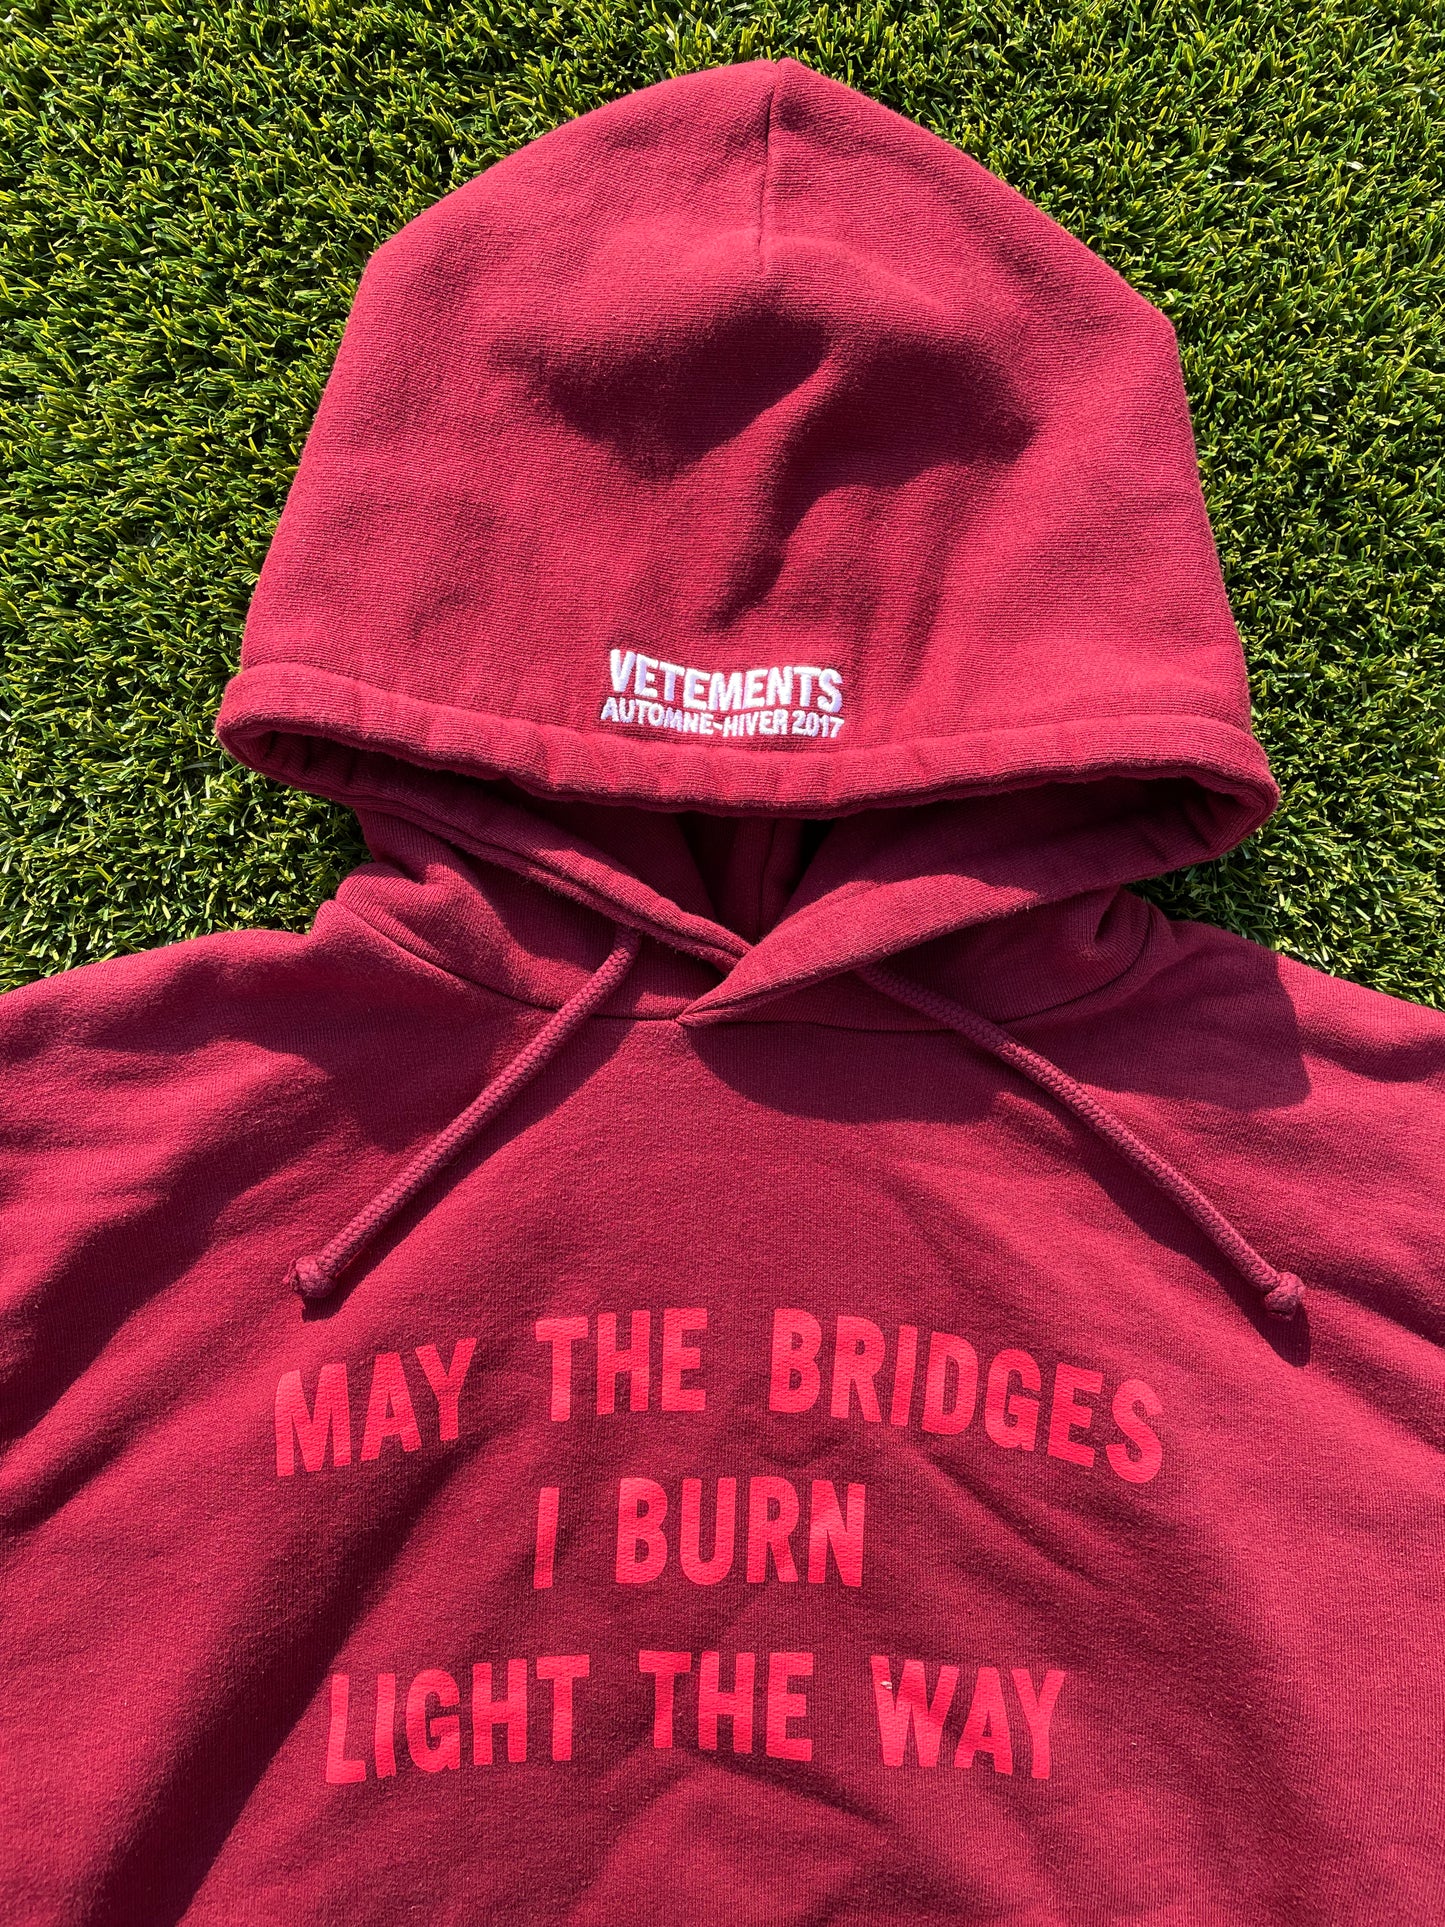 AW17 Vetements “May The Bridges I Burn” Cropped Hoodie